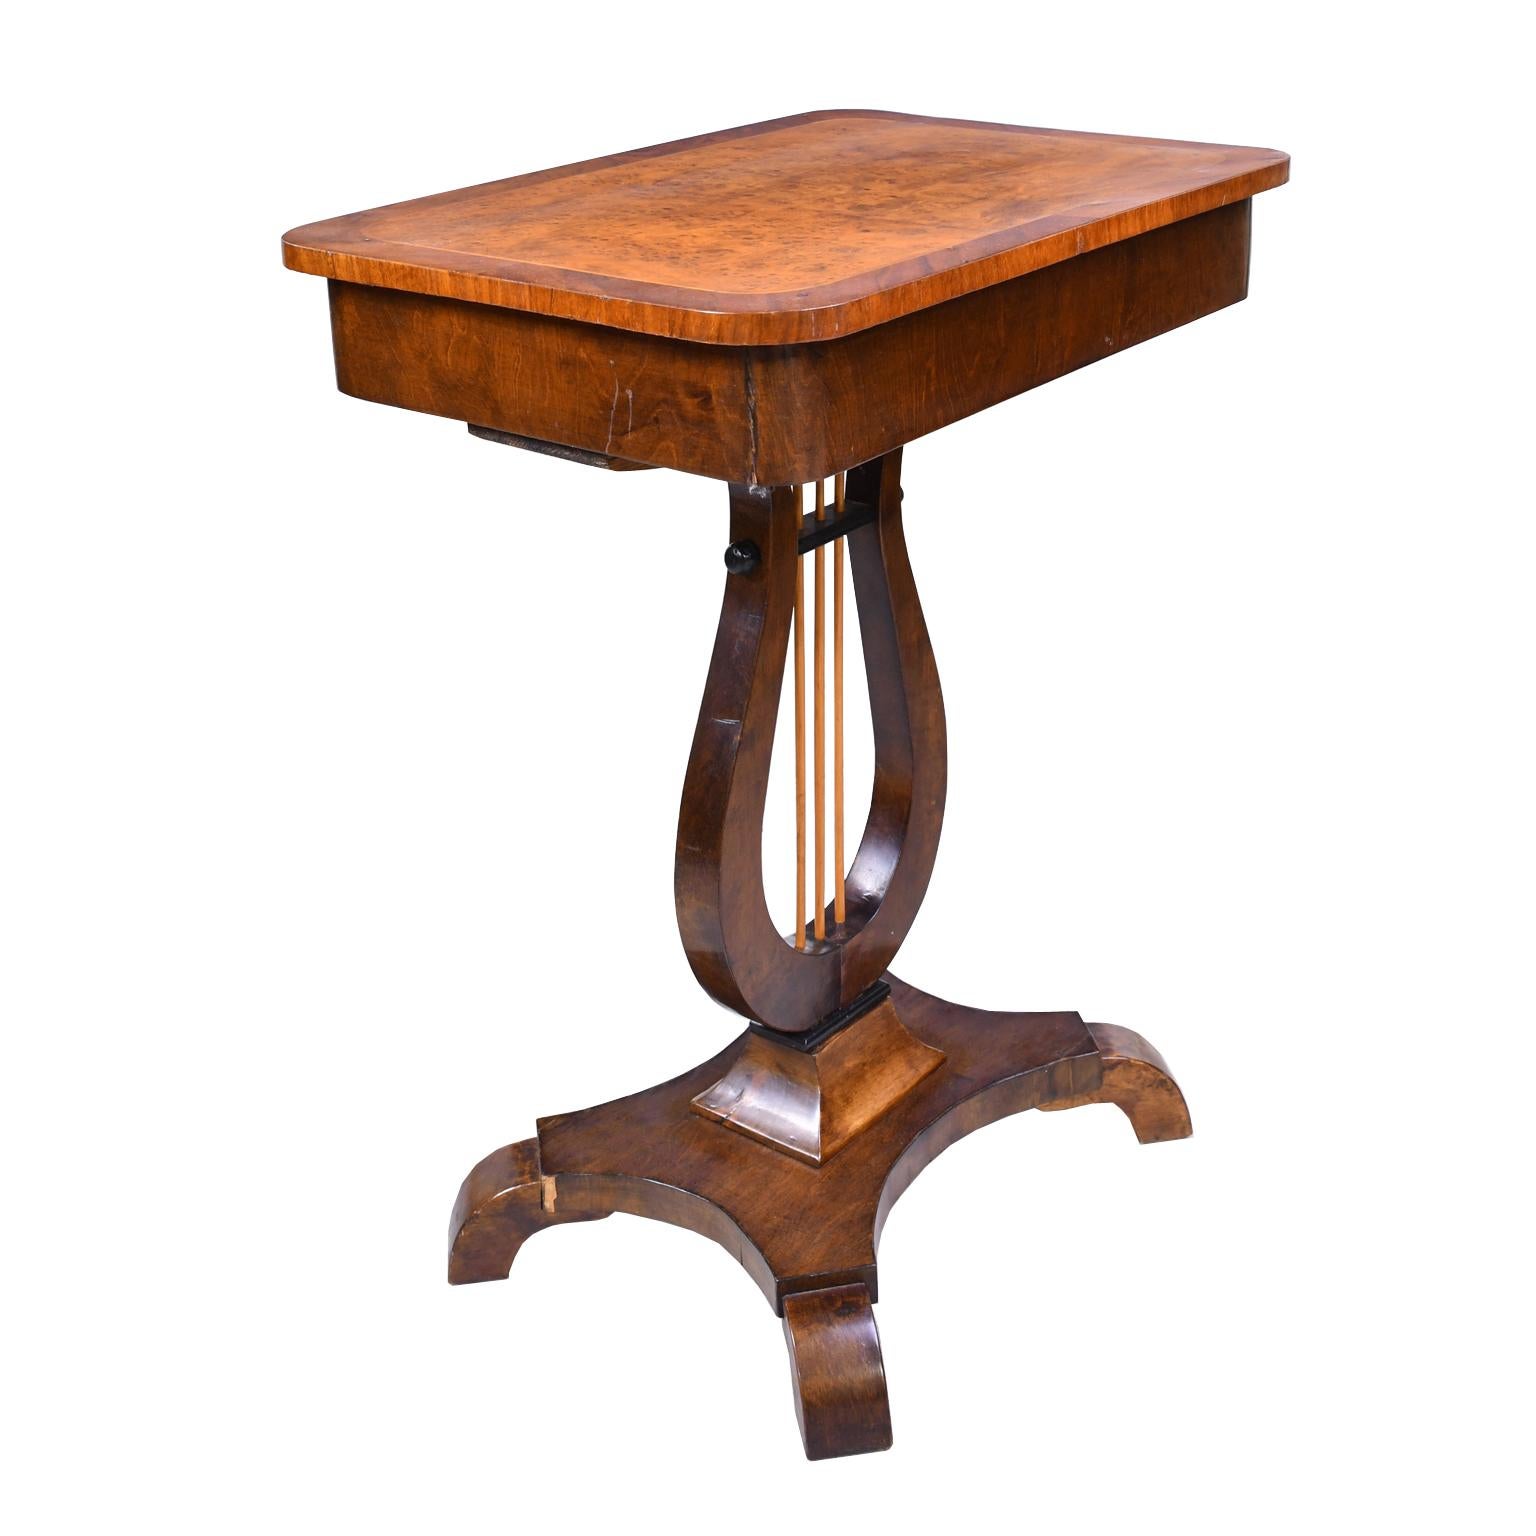 Early 19th Century Karl Johan Salon Table in Birchwood with Lyre Pedestal, Sweden, circa 1820 For Sale